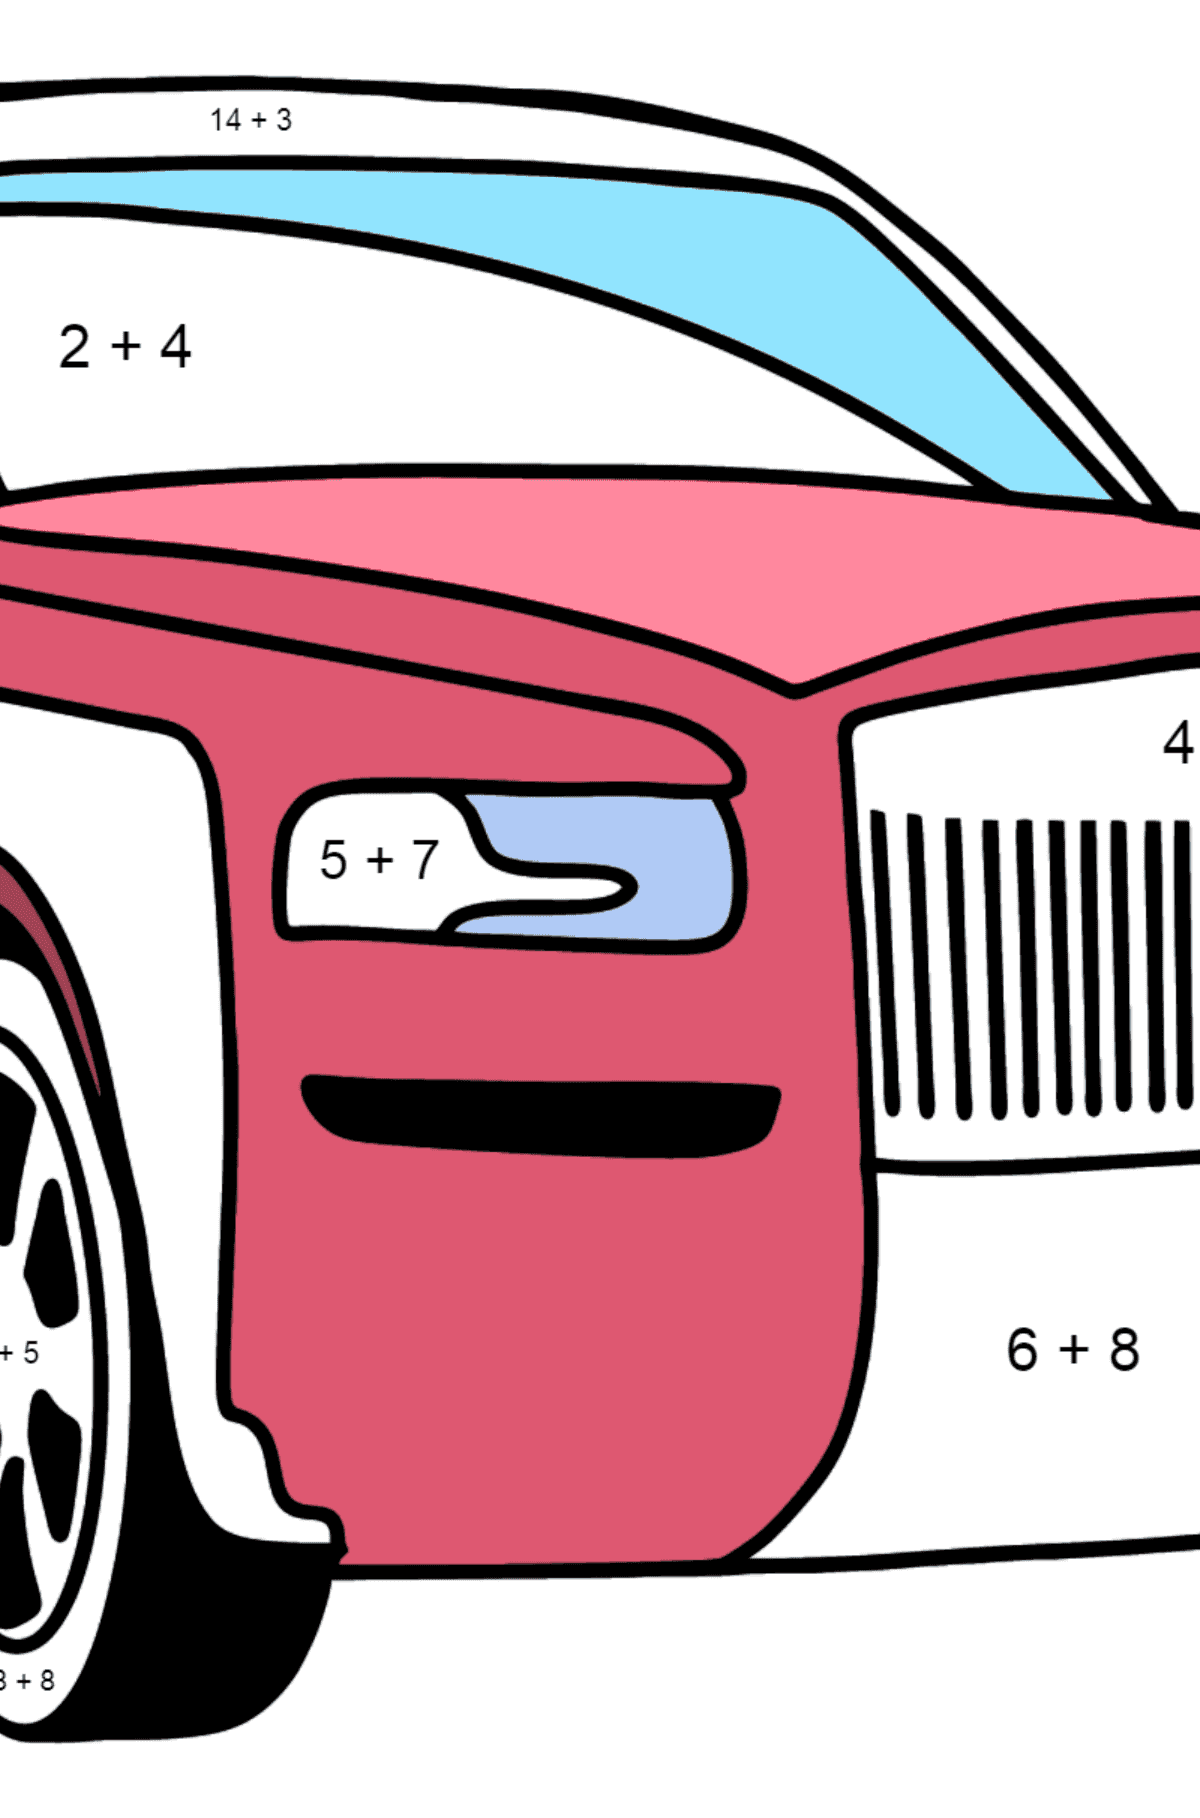 Rolls Royce Cullinan Car coloring page - Math Coloring - Addition for Kids